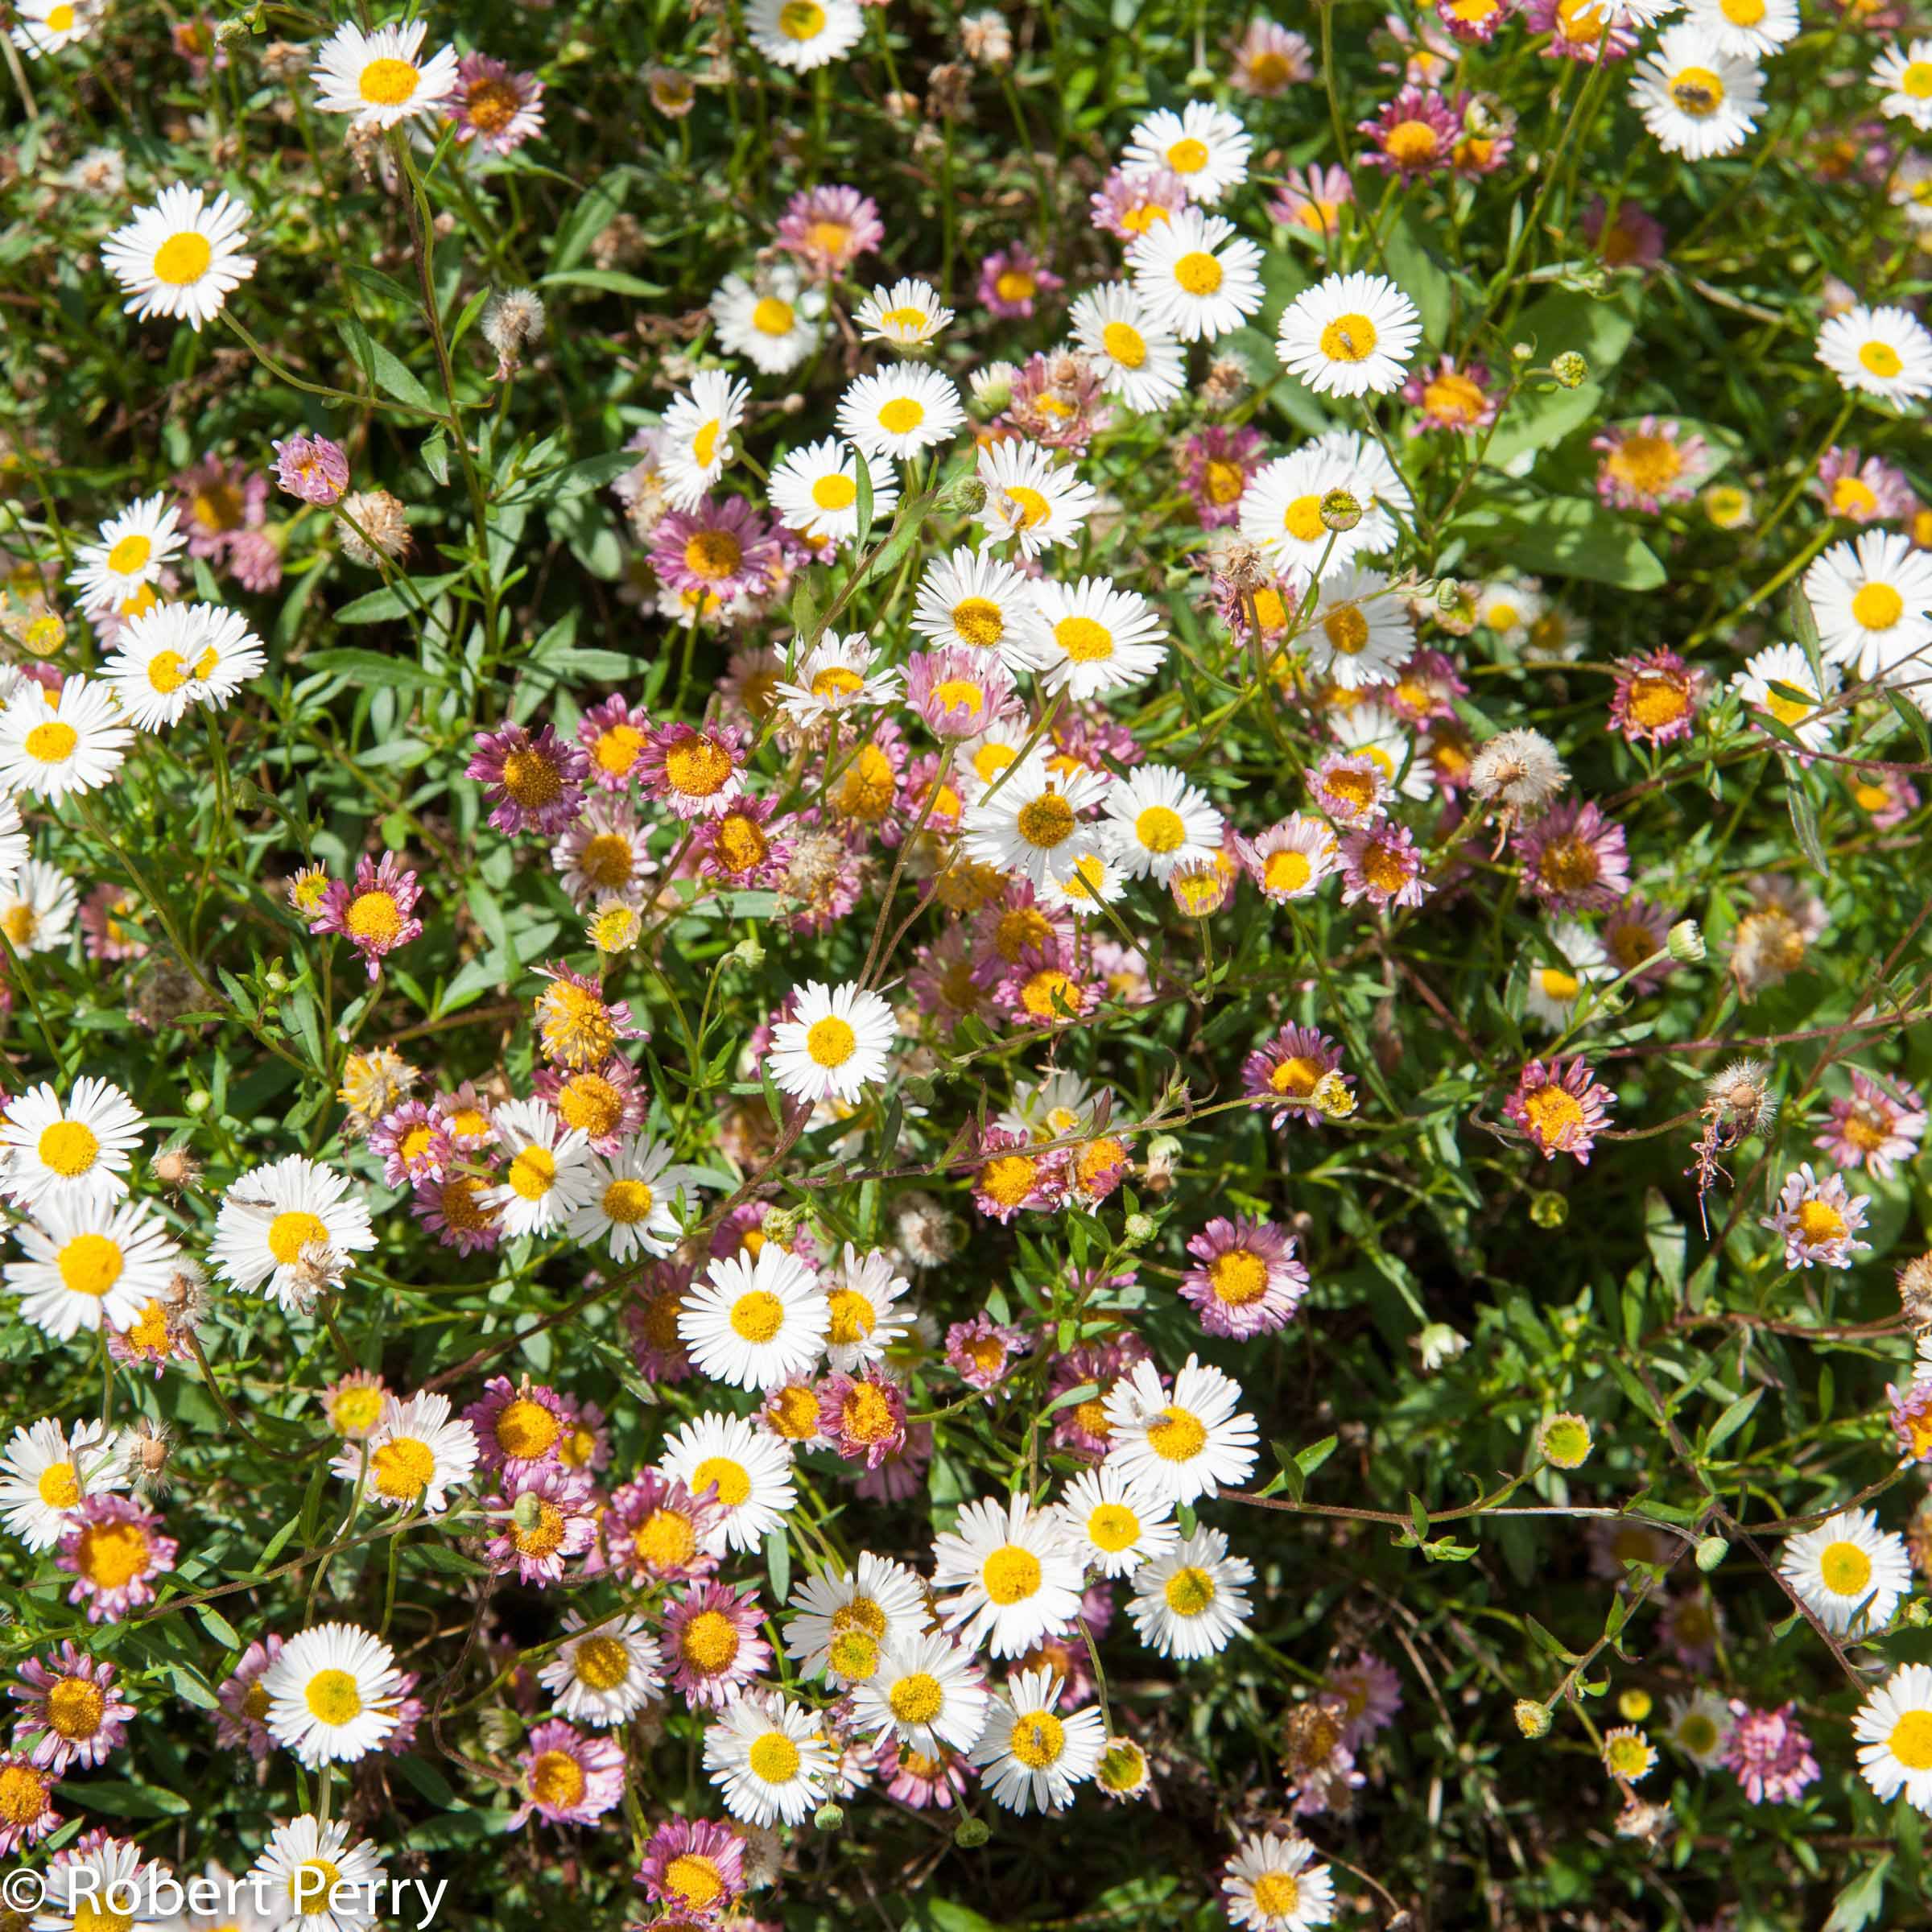 Image of Mexican Daisy ground cover flower